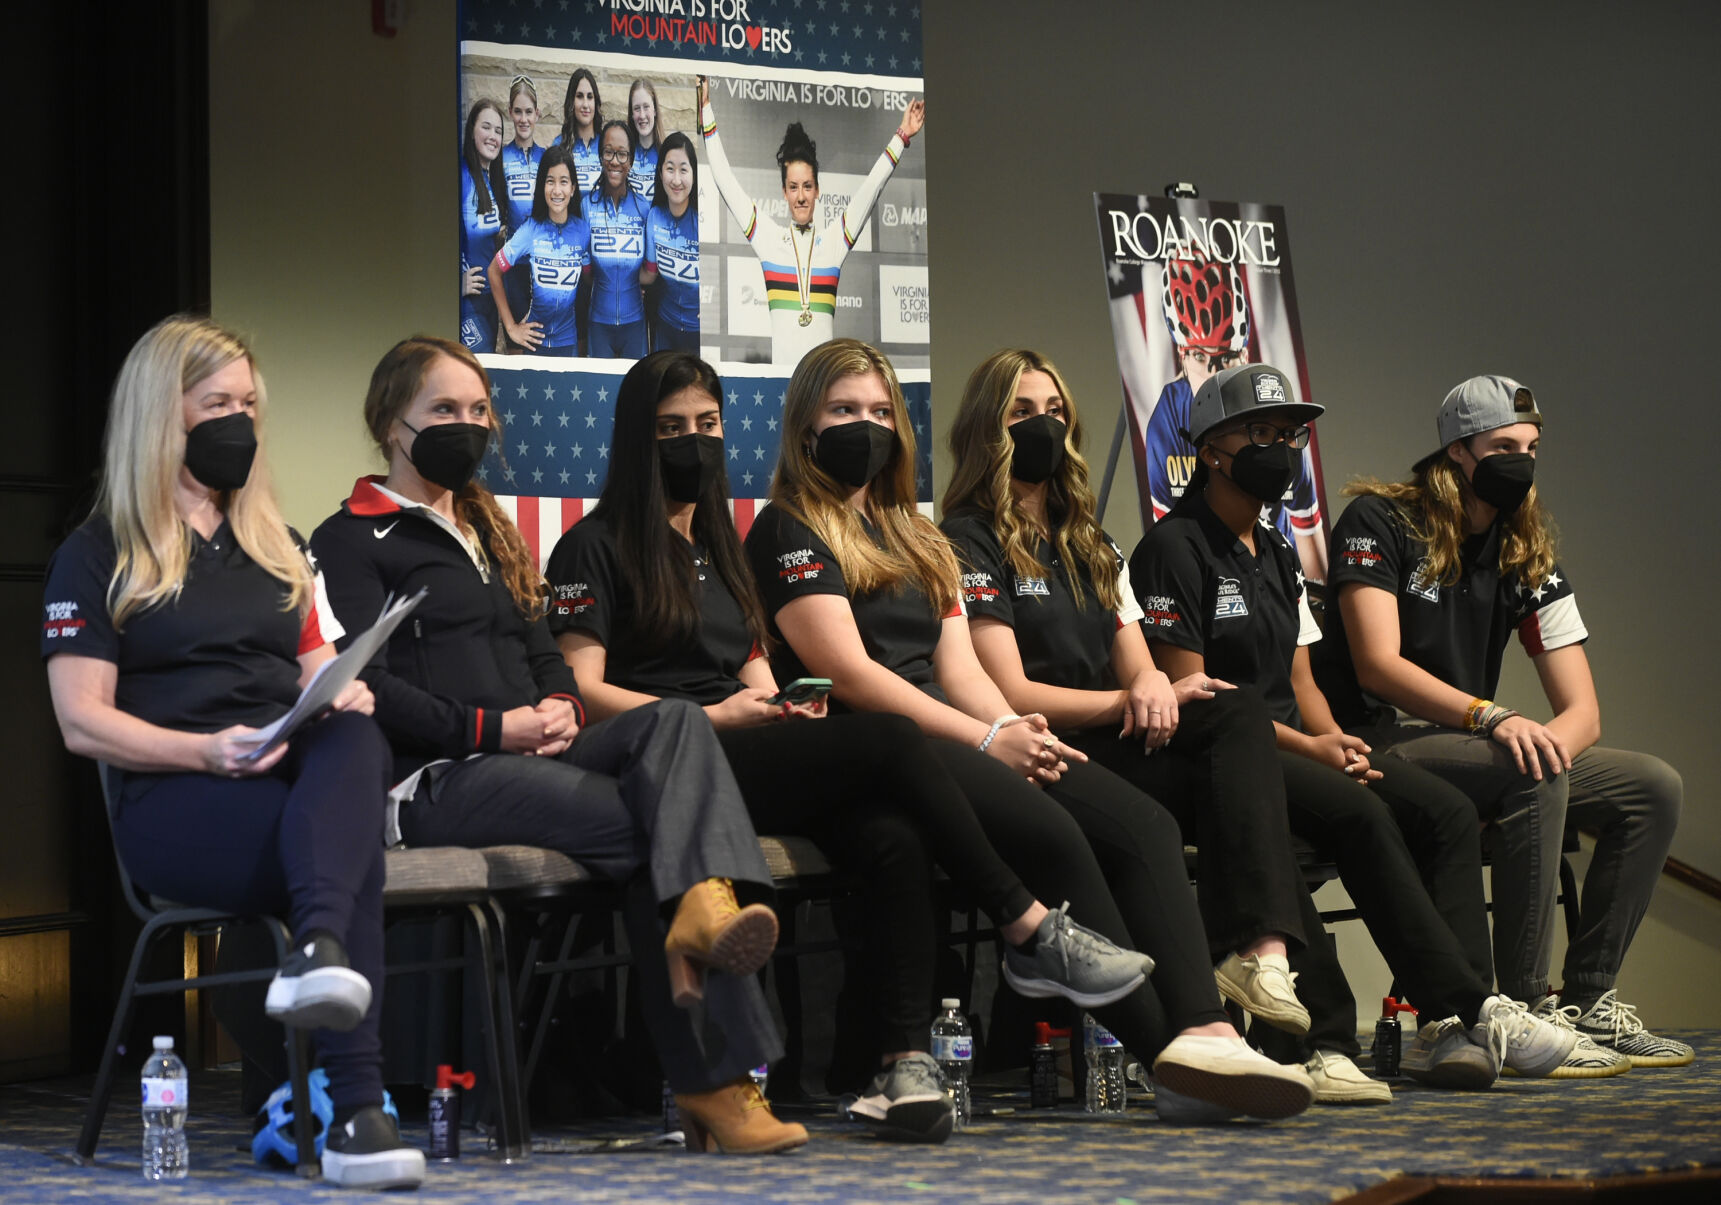 Top womens cycling team, with 24 Olympics hopefuls, to train in Roanoke area